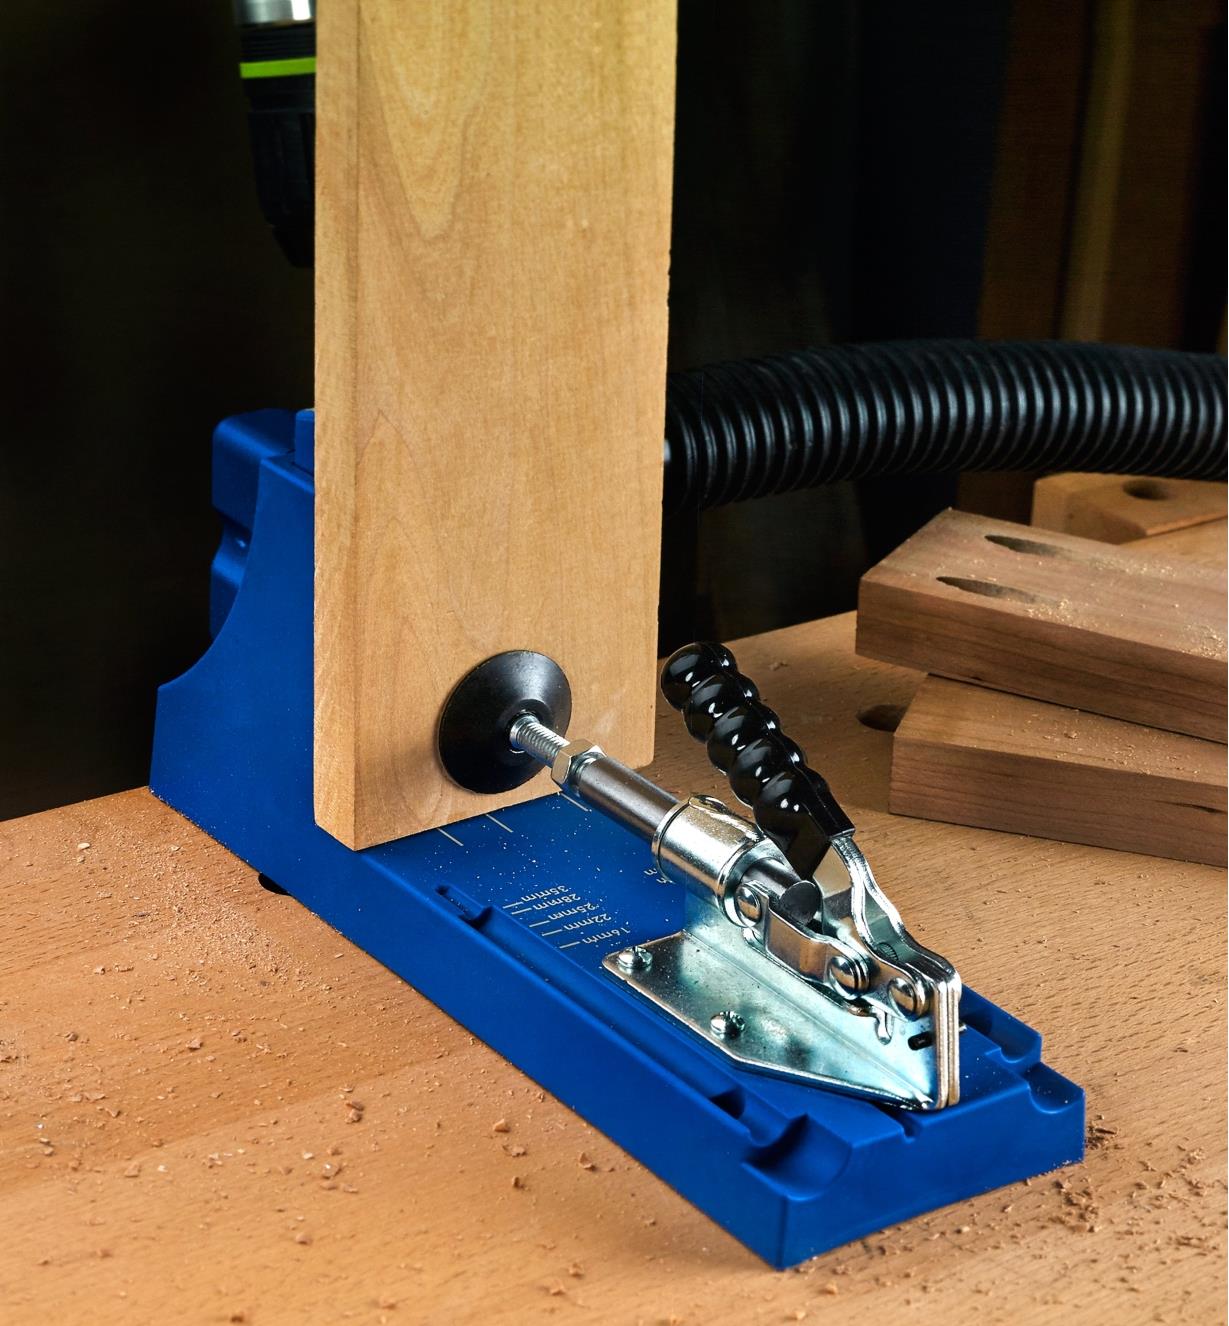 A rear view of a K4 metric jig in use, showing how the workpiece is held in place for drilling